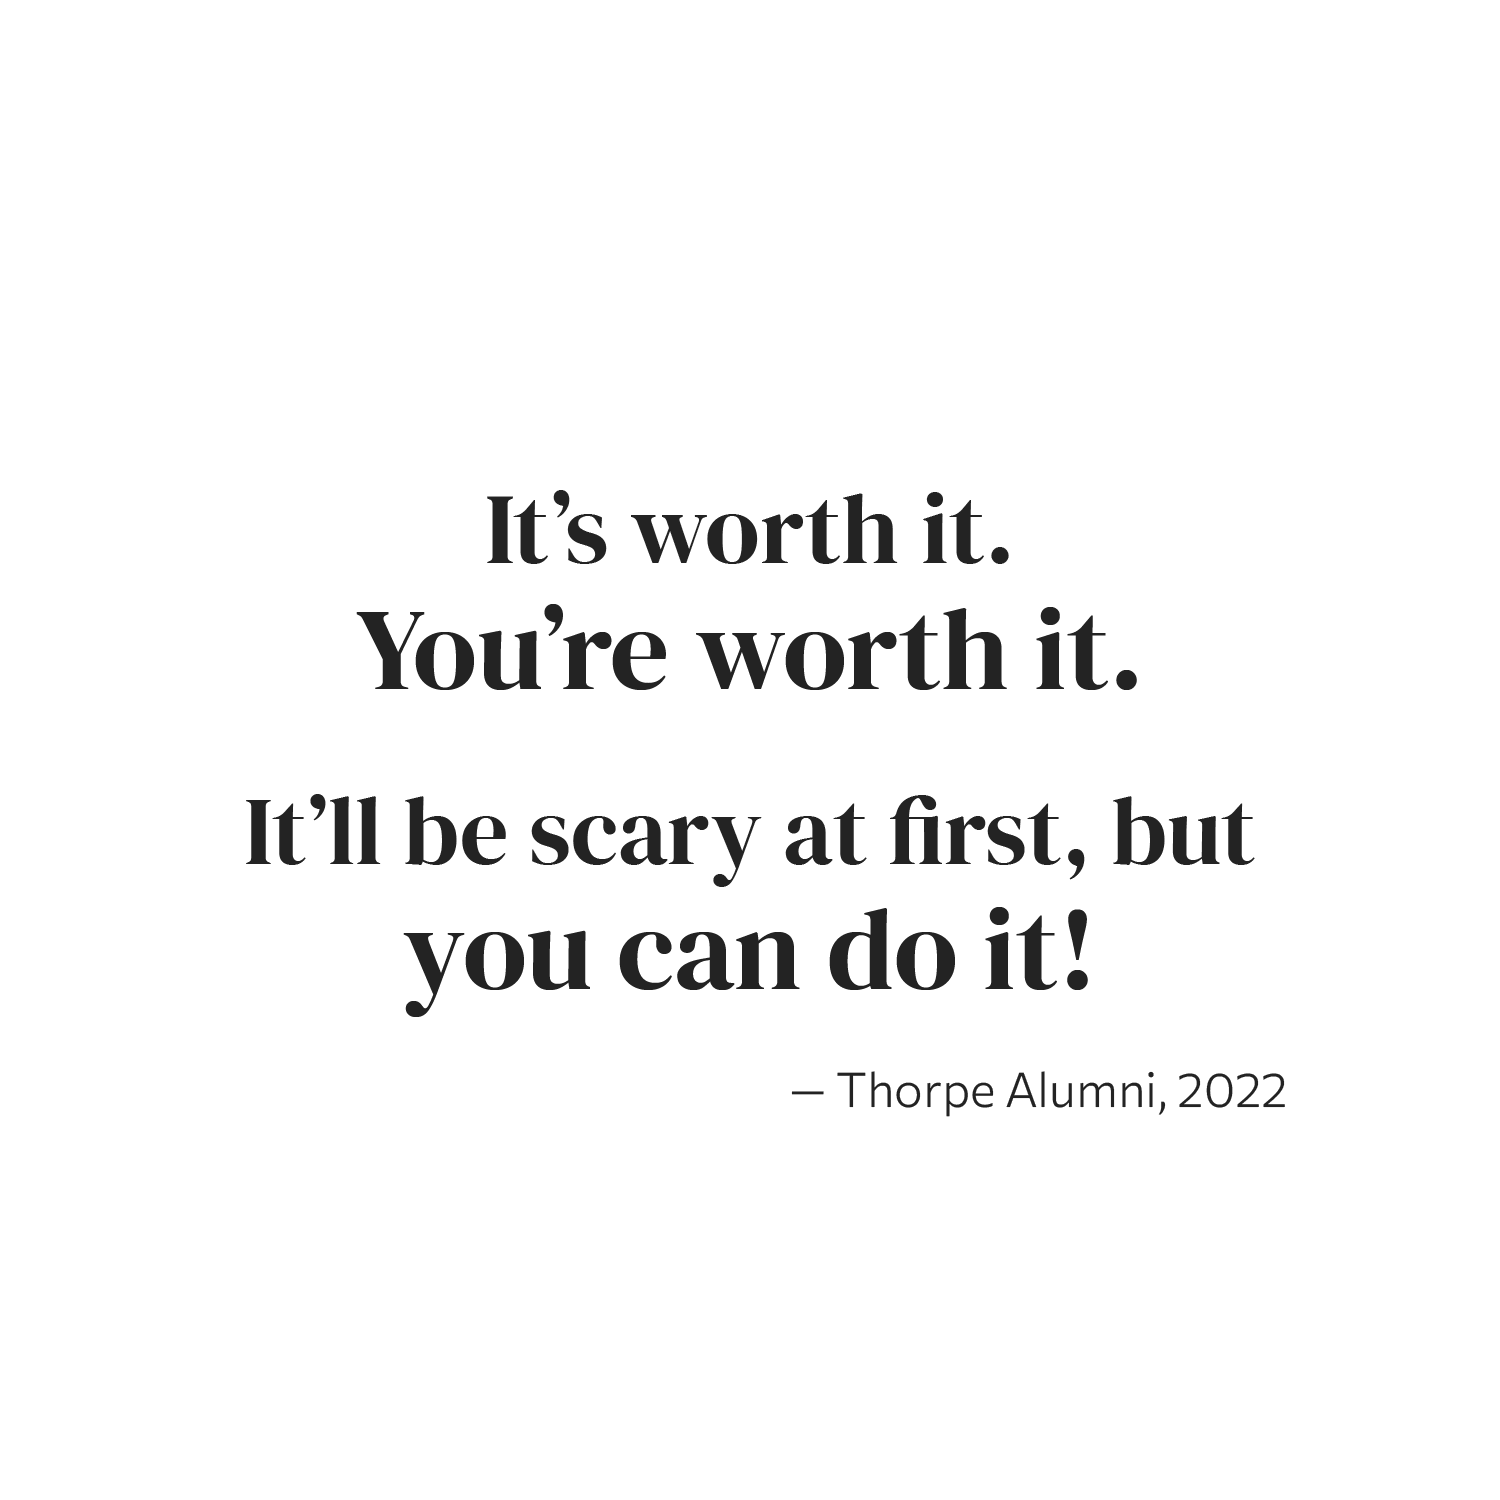 It's worth it. You're worth it. It'll be scary at first, but you can do it!